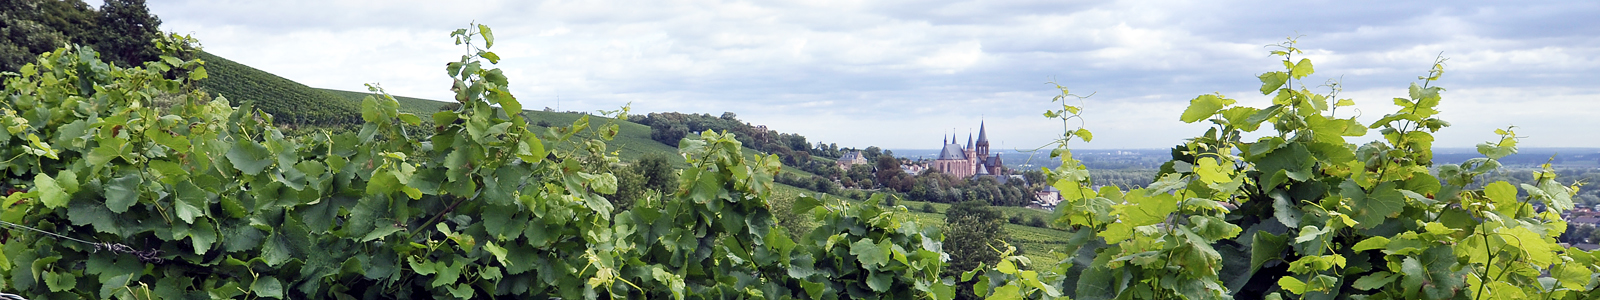 Vineyard with a view of a church ©DLR